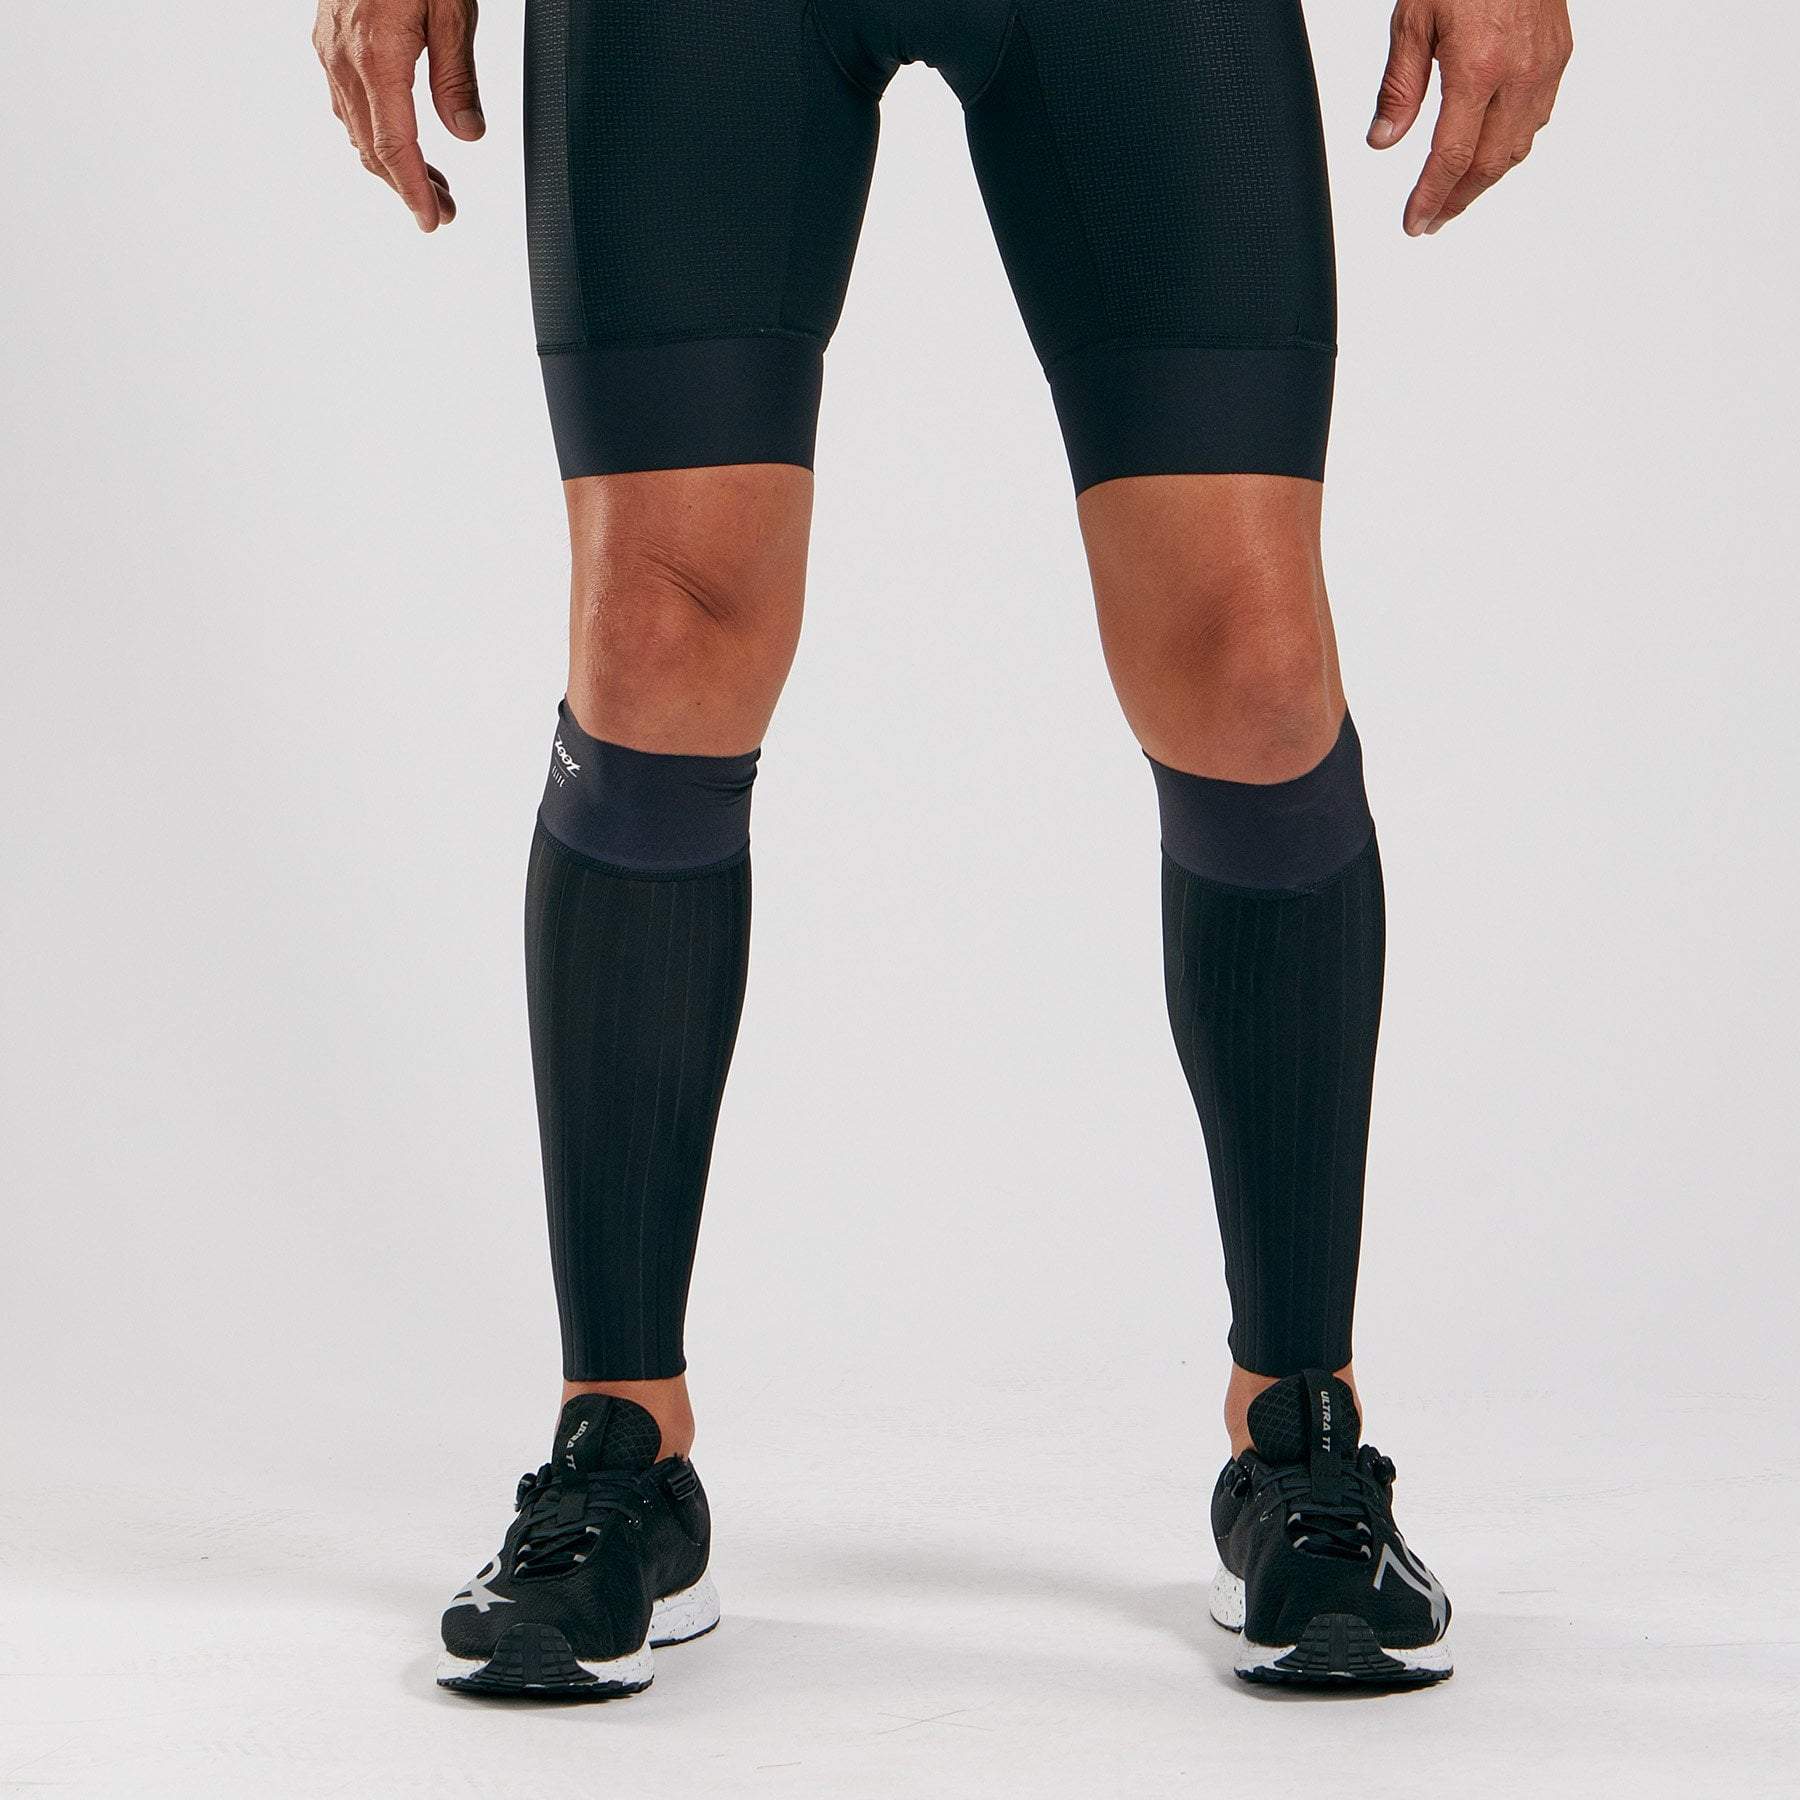 Skins Series 3 Unisex Calf Compression Sleeves